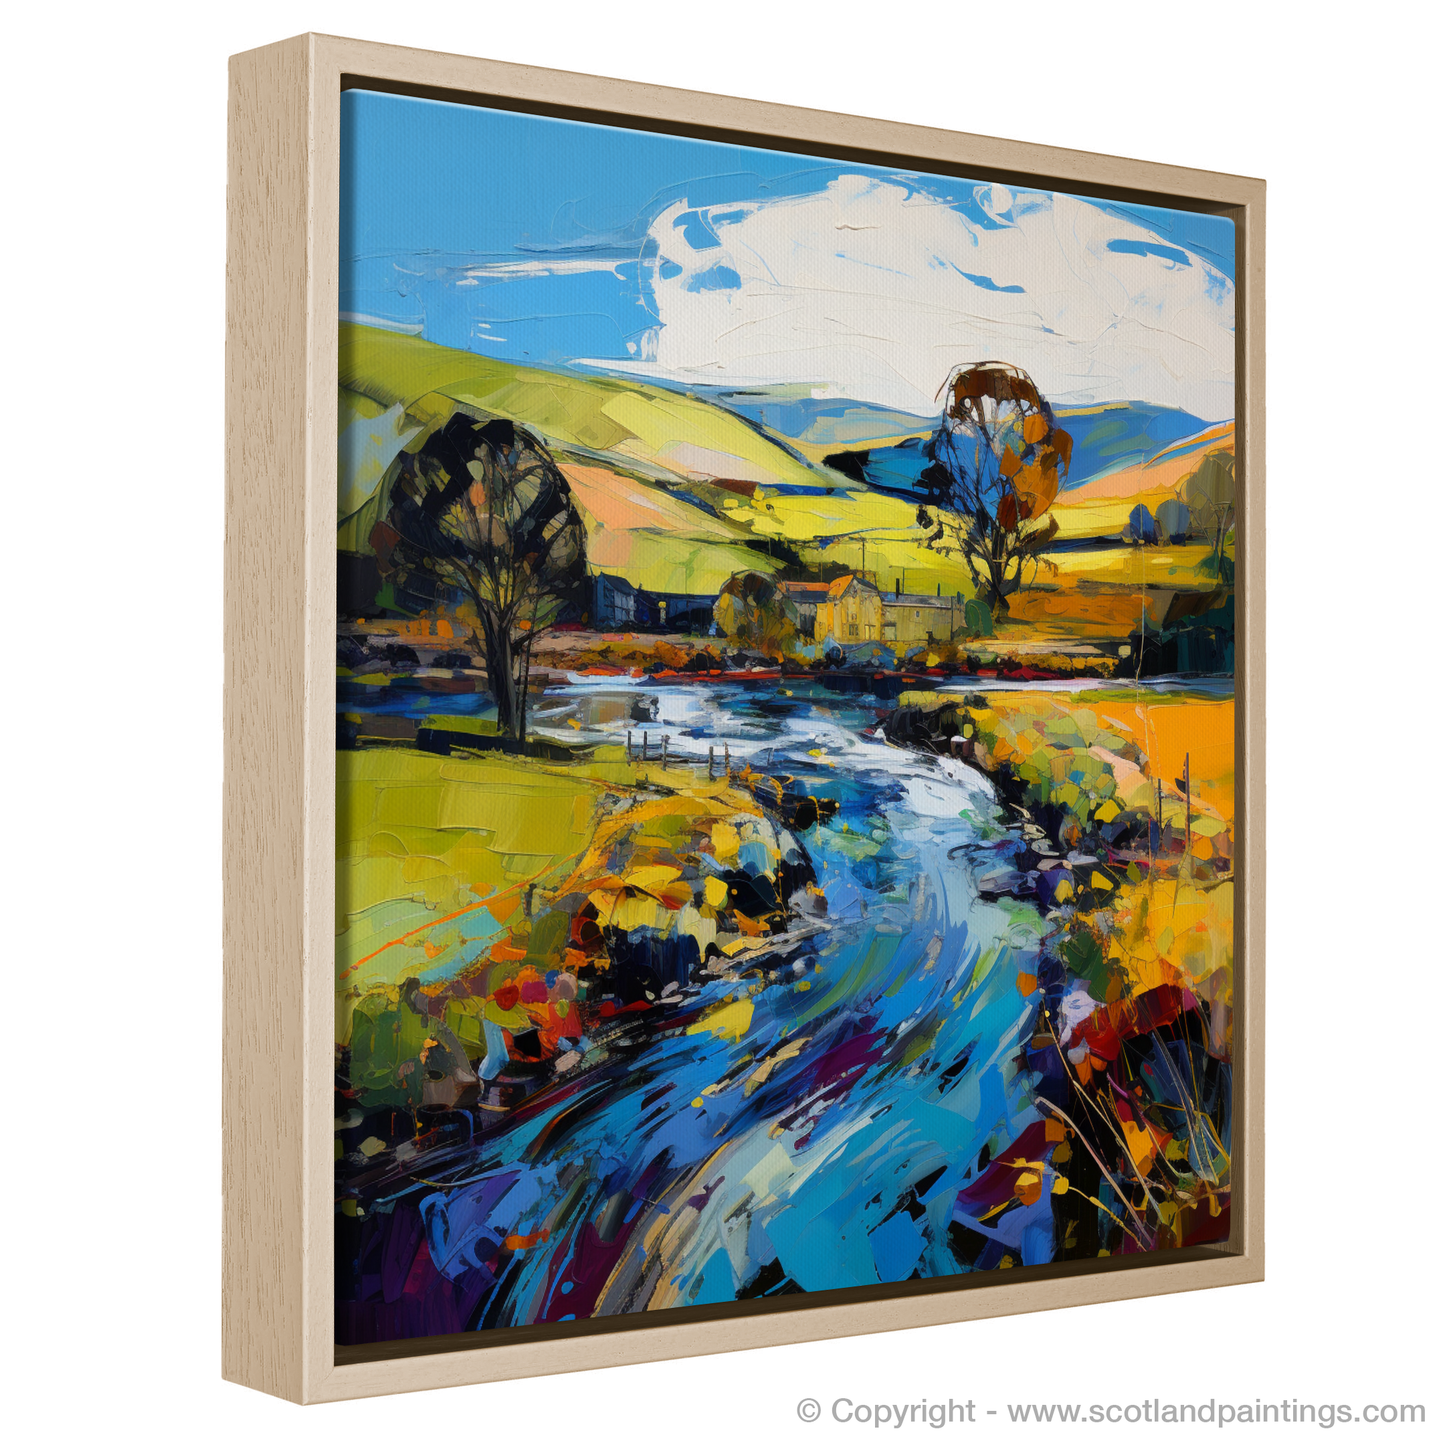 Painting and Art Print of River Deveron, Aberdeenshire entitled "Expression of River Deveron - A Scottish Rivers Masterpiece".